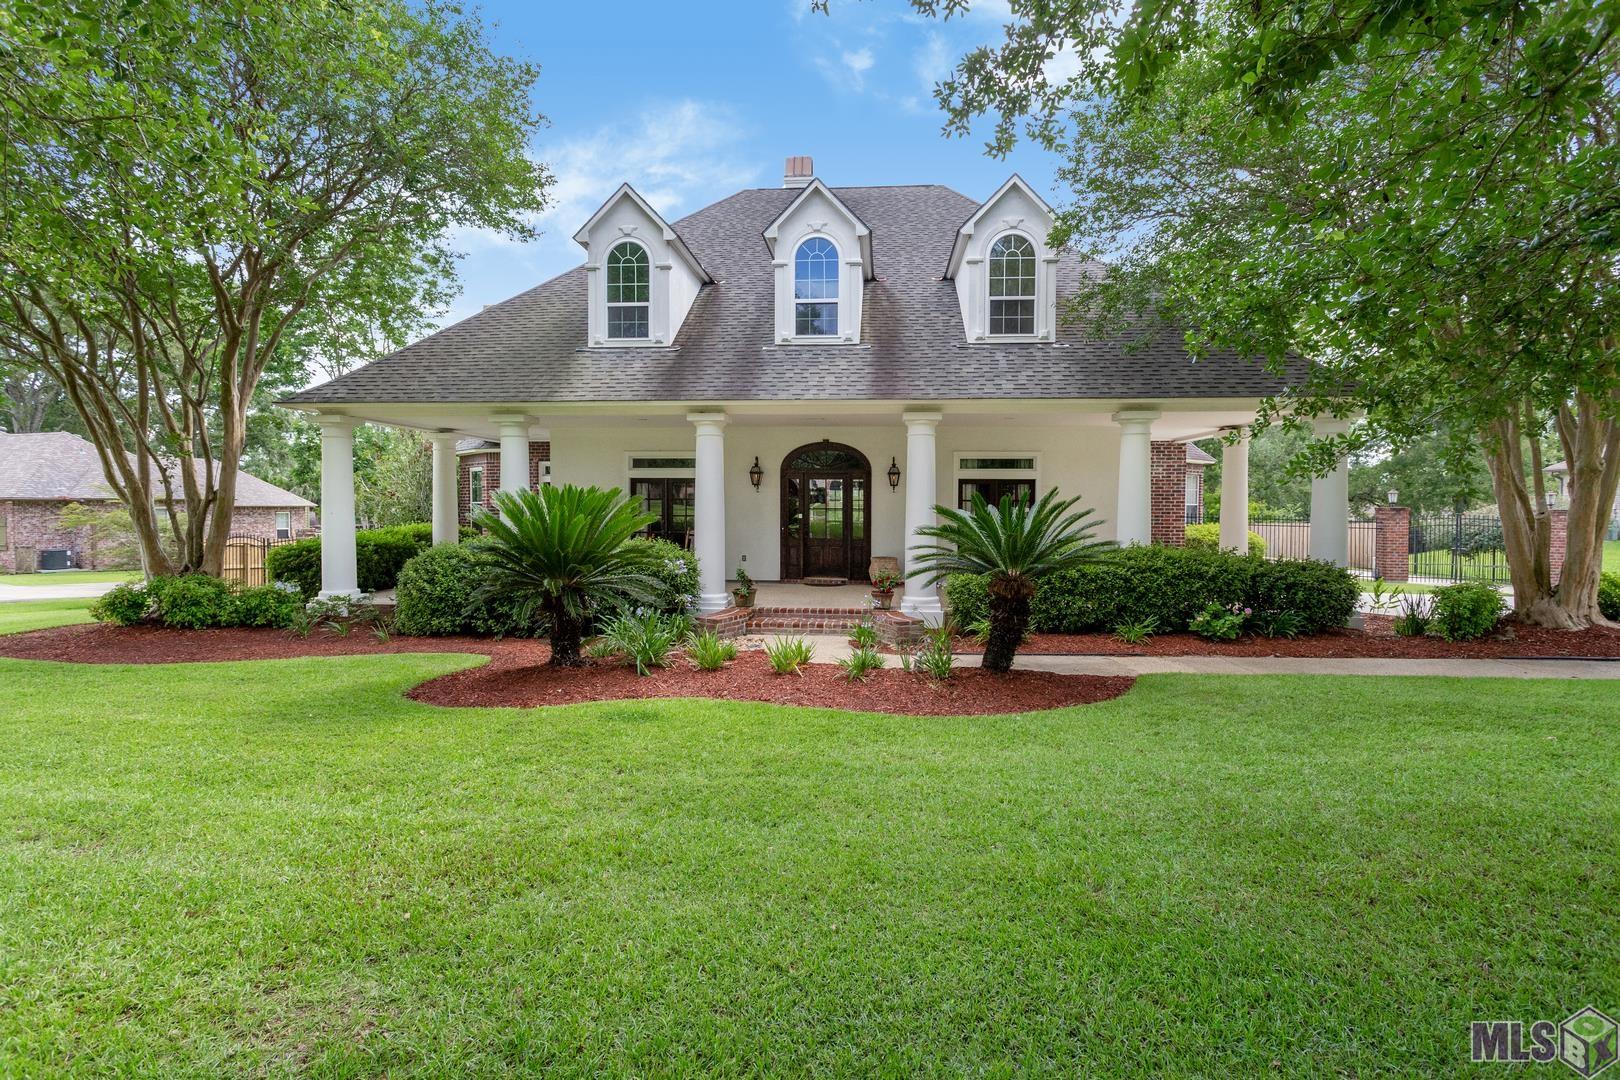 Beautiful 5BR/3.5BA Custom Built Home on a 2 Acre Lot in Highly Desired Manchac Plantation Subd. Features: 3 Car Garage, Outdoor Kit w/Stainless BBQ Pit, Kamado Joe Smoker and Wood Burning FP! Terraced Decking Leads to a Huge Resort Style Gunite Pool w/a Huge Hot Tub w/Rock Waterfall & Slide! Bonus - An 891 SqFt Guest House Located Over the Garage w/Separate Entry Has Kit&Bath (Not Included in Total Living Area).  The 1st Floor Features a Formal Dining Rm, Study, Main Living Area w/FP & Built-ins, Keeping Rm w/Built-ins, Kit w/Granite Countertops, Stainless Appliances, Double Ovens/Gas Cooktop, Island w/Vegetable Sink and Wine Fridge. There is a 1/2BA and Laundry Rm Just Off the Keeping Rm. Spacious MBR w/FP, Brand New Designer Inspired MBA Has Custom Shower, Soaking Tub, and His/Her Vanities. An Added Bonus is the Fabulous New Addition off the MBA w/Views of the Pool Area and Expansive Fenced Yard. This Space Can Be Used as a Nursery, Workout Rm, Office, Prayer Rm or Hobby Rm! Upstairs You Will Find a Large Common Area w/Built-In Entertainment Center/Computer Area, 4 Very Spacious Bedrooms Arranged into 2 Suites on Either Side of the Common Area. Each GBR Has a Private Vanity and Walk-In Closet. Newly Re-Finished Oak Flooring and Brick Flooring Throughout the First Floor of the Main House. Fresh Paint Inside and Out! American Home Shield Home Warranty is Currently in Place and is Transferrable!  Hurry This One Won't Last!